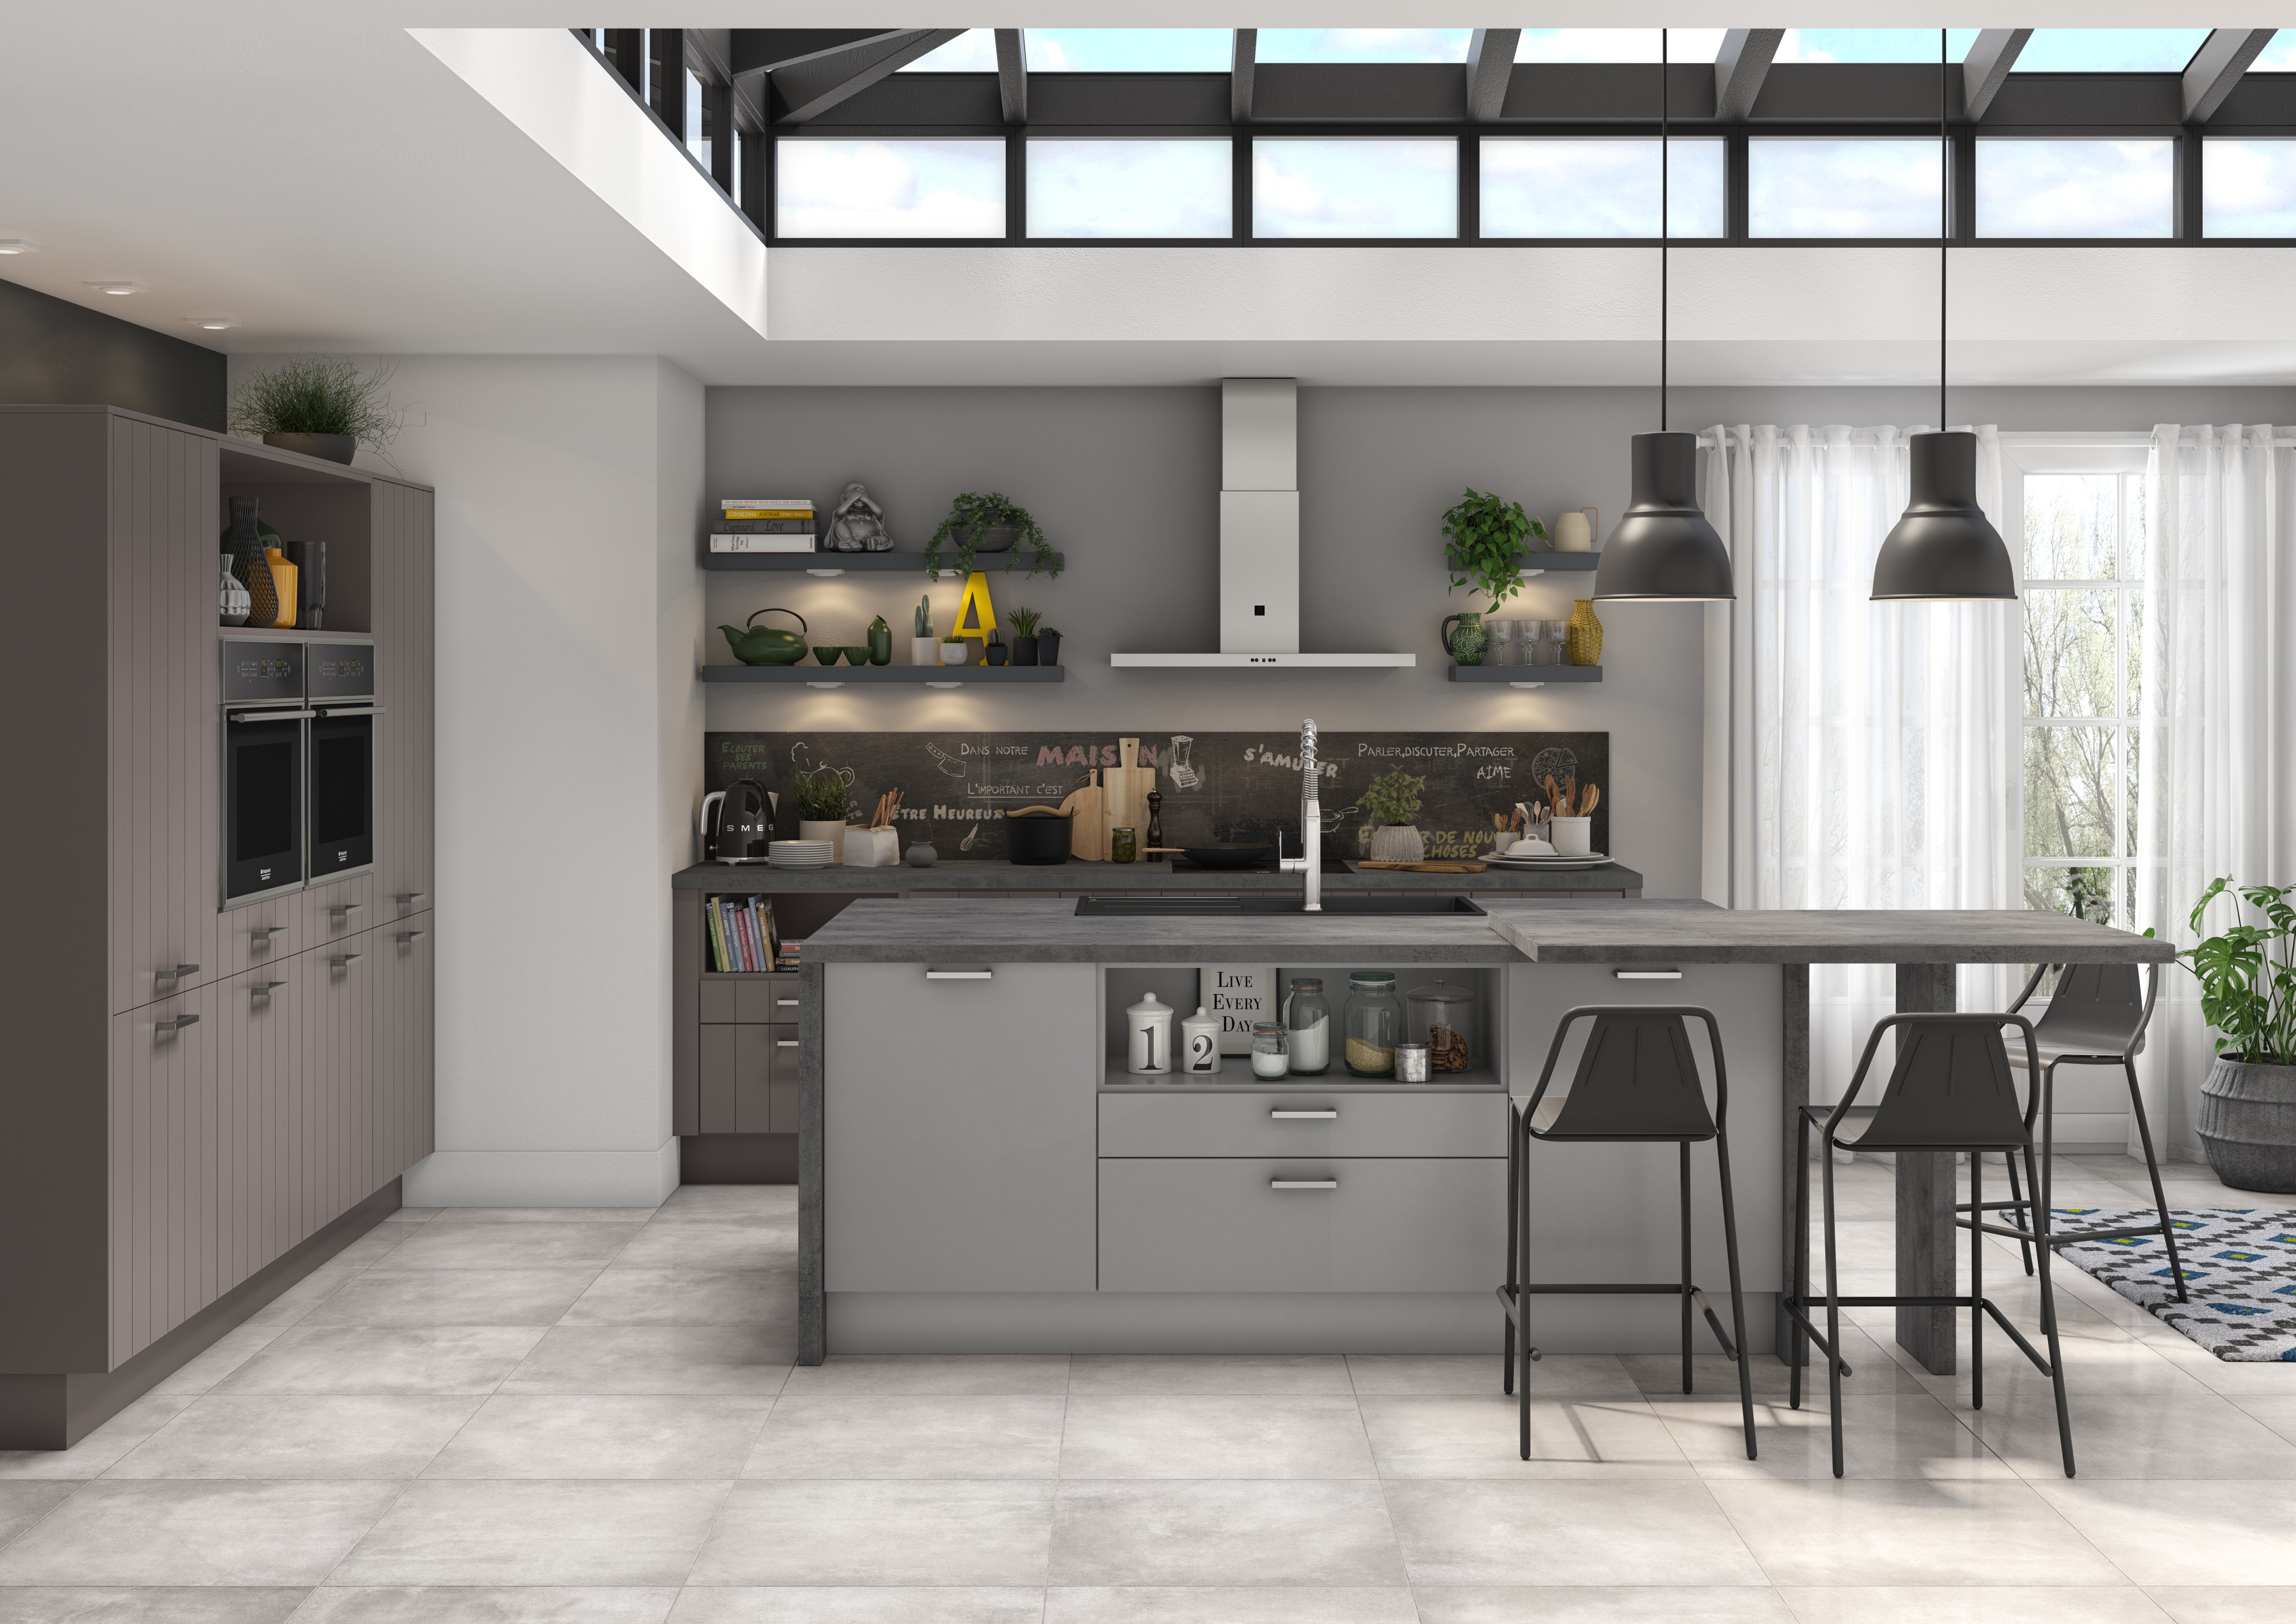 Cuisine Ixina : modèle Sava, collection mate - Contemporary - Kitchen -  Other - by Ixina Officiel | Houzz